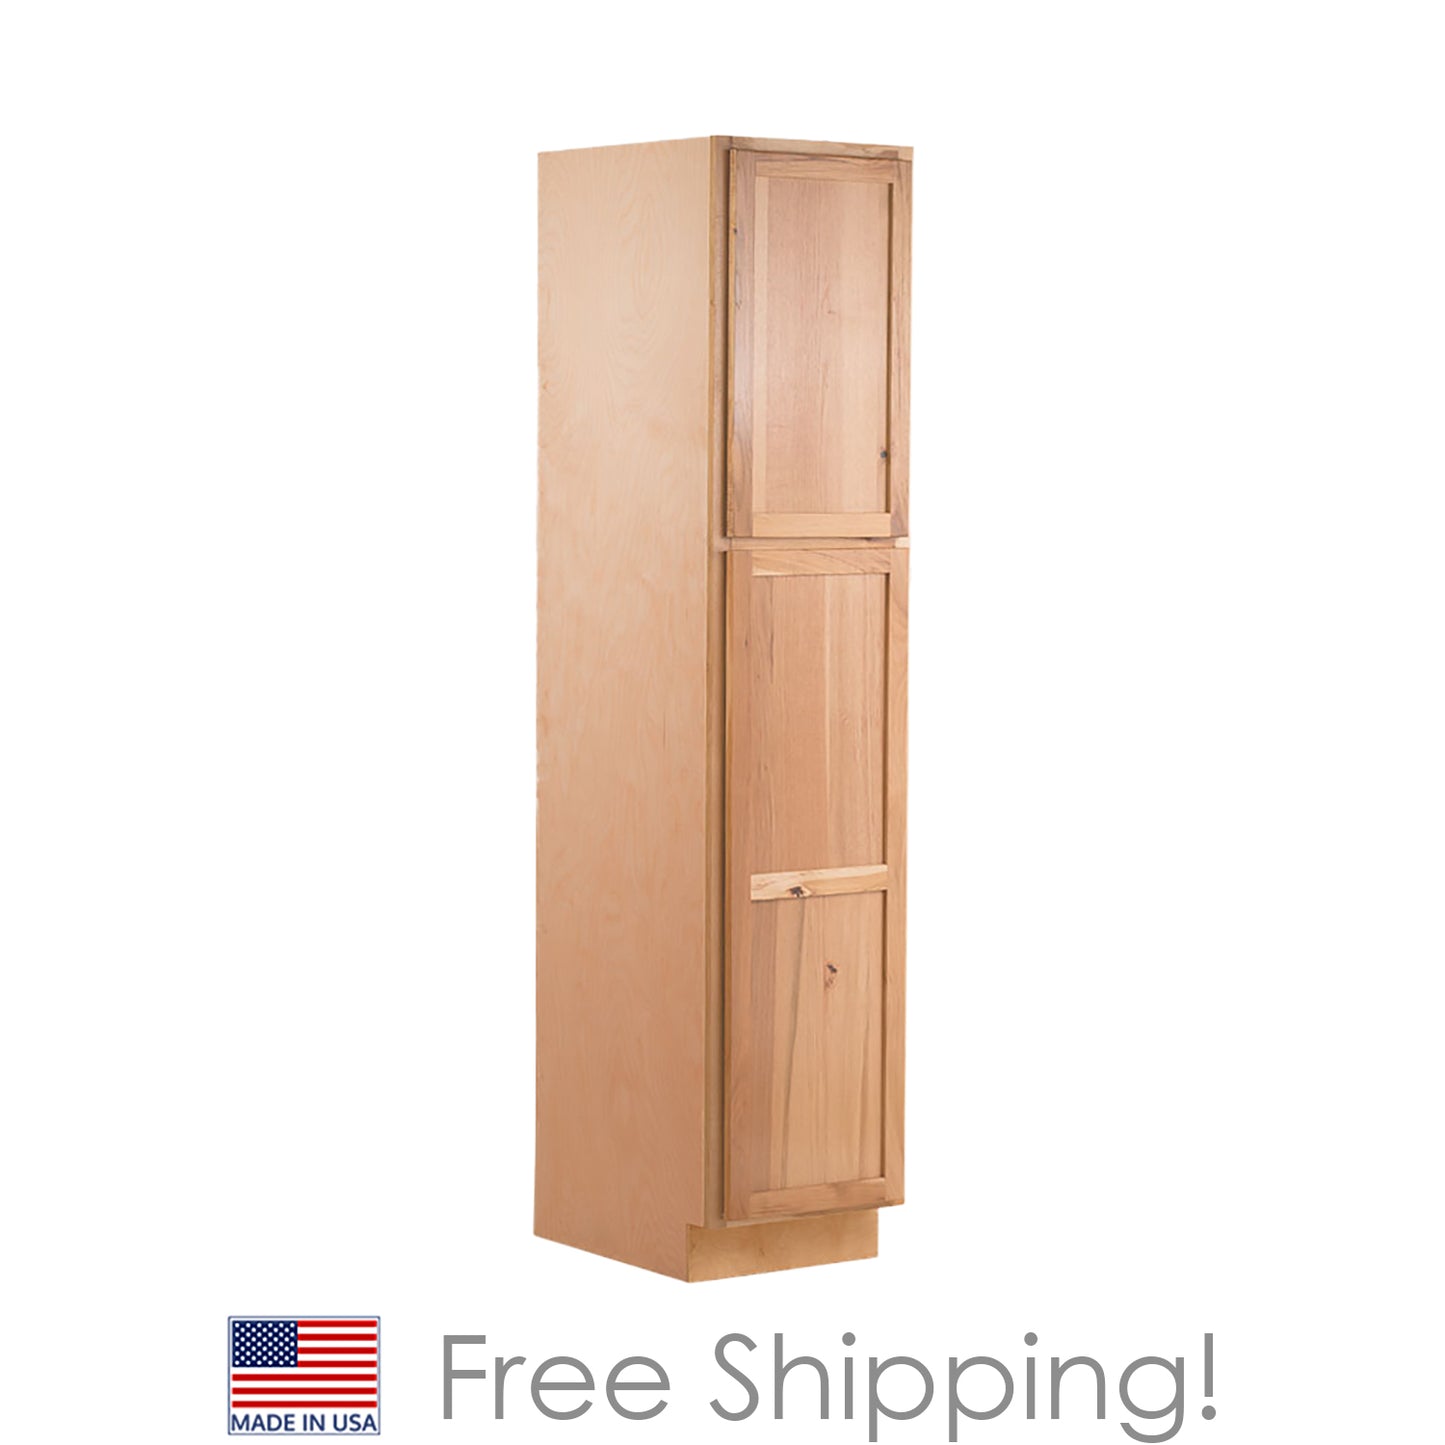 Quicklock RTA (Ready-to-Assemble) Raw Hickory Pantry Cabinet- 18" Wide